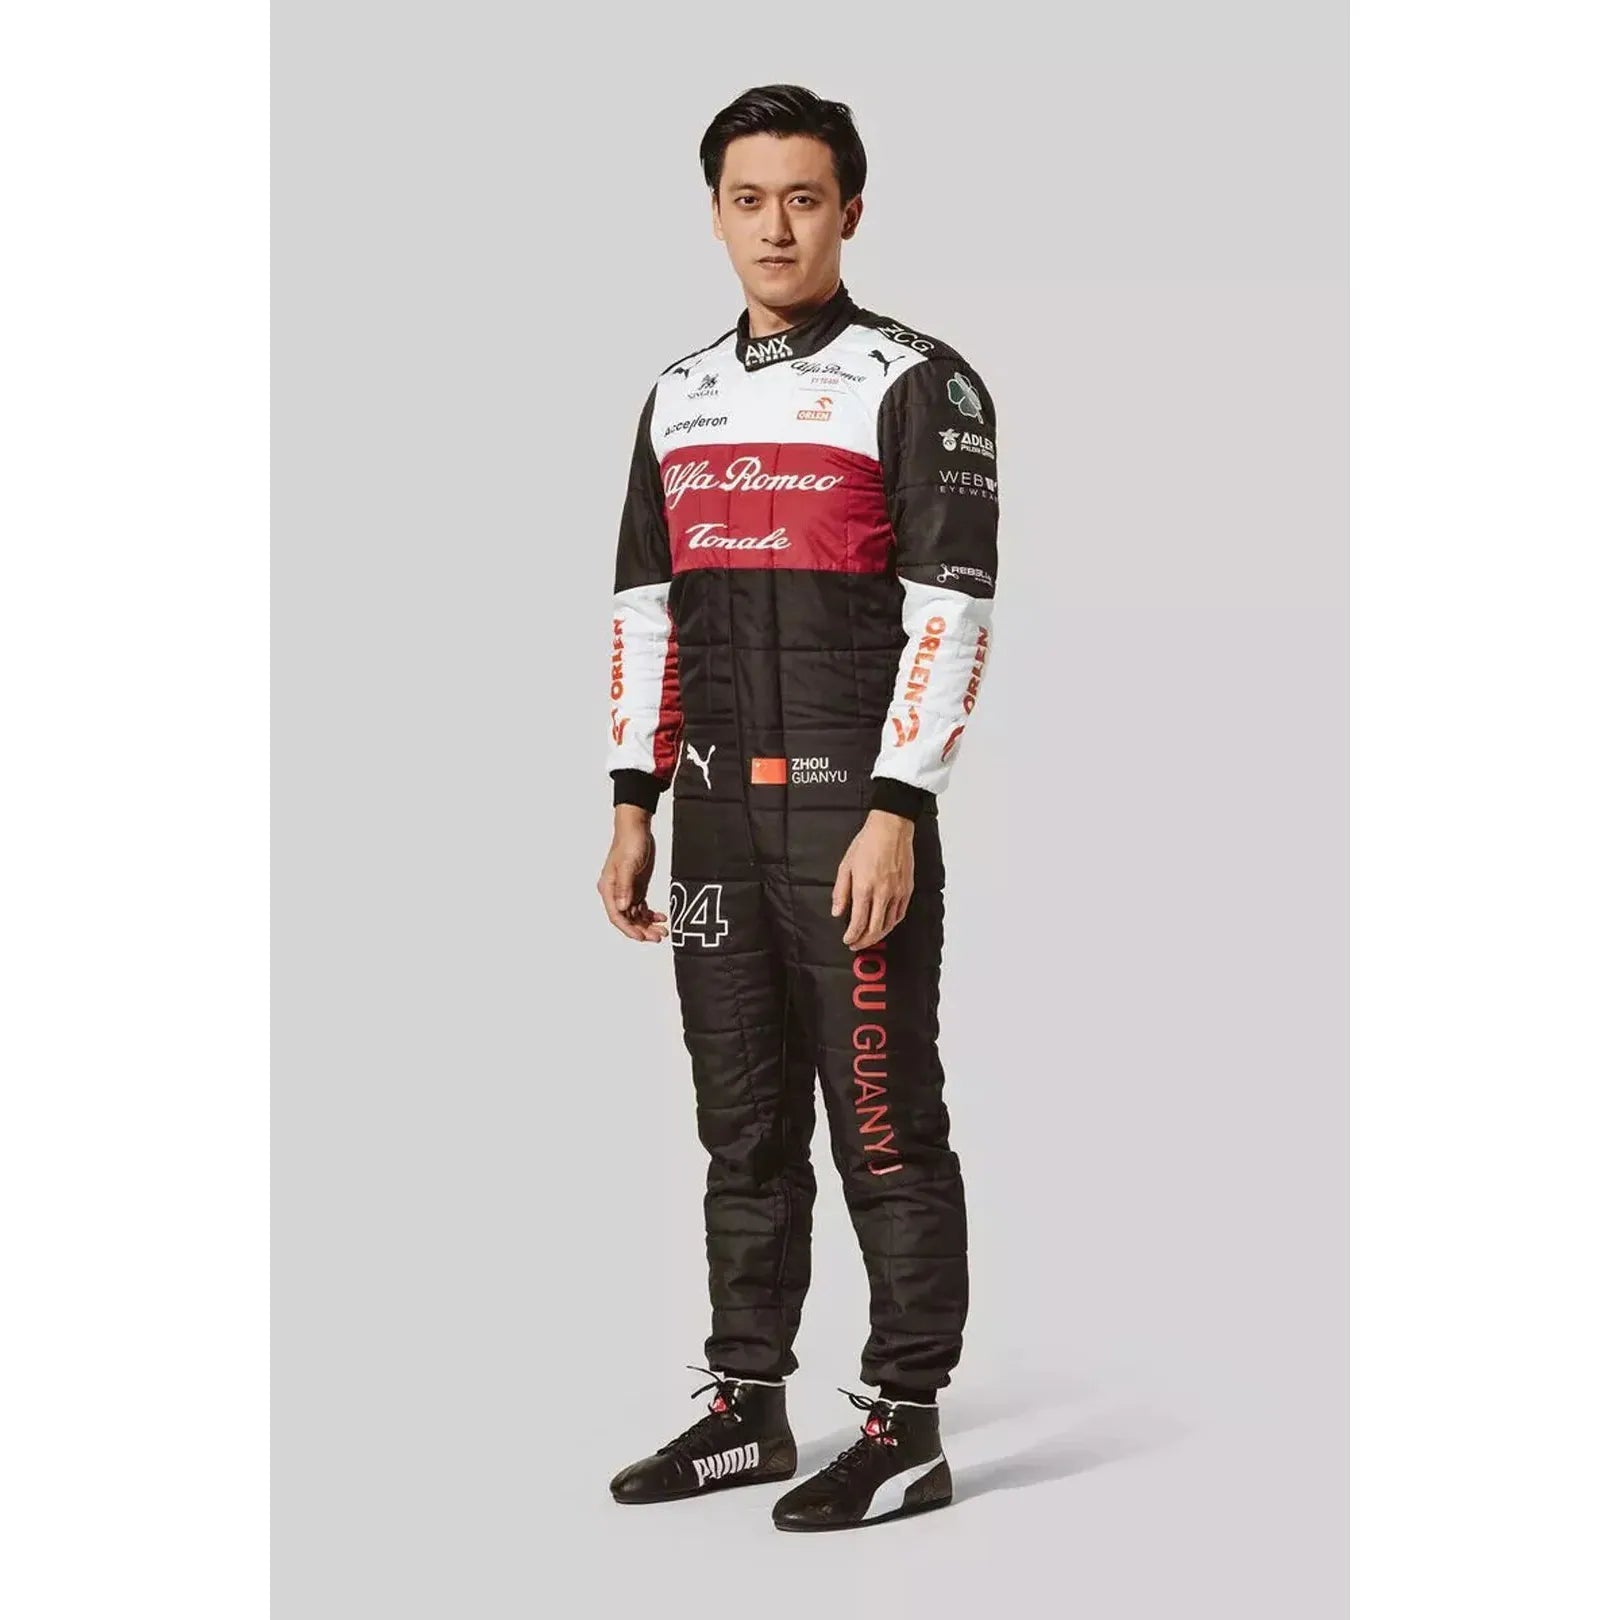 Go kart racing Sublimation Protective clothing Racing gear Suit N-035